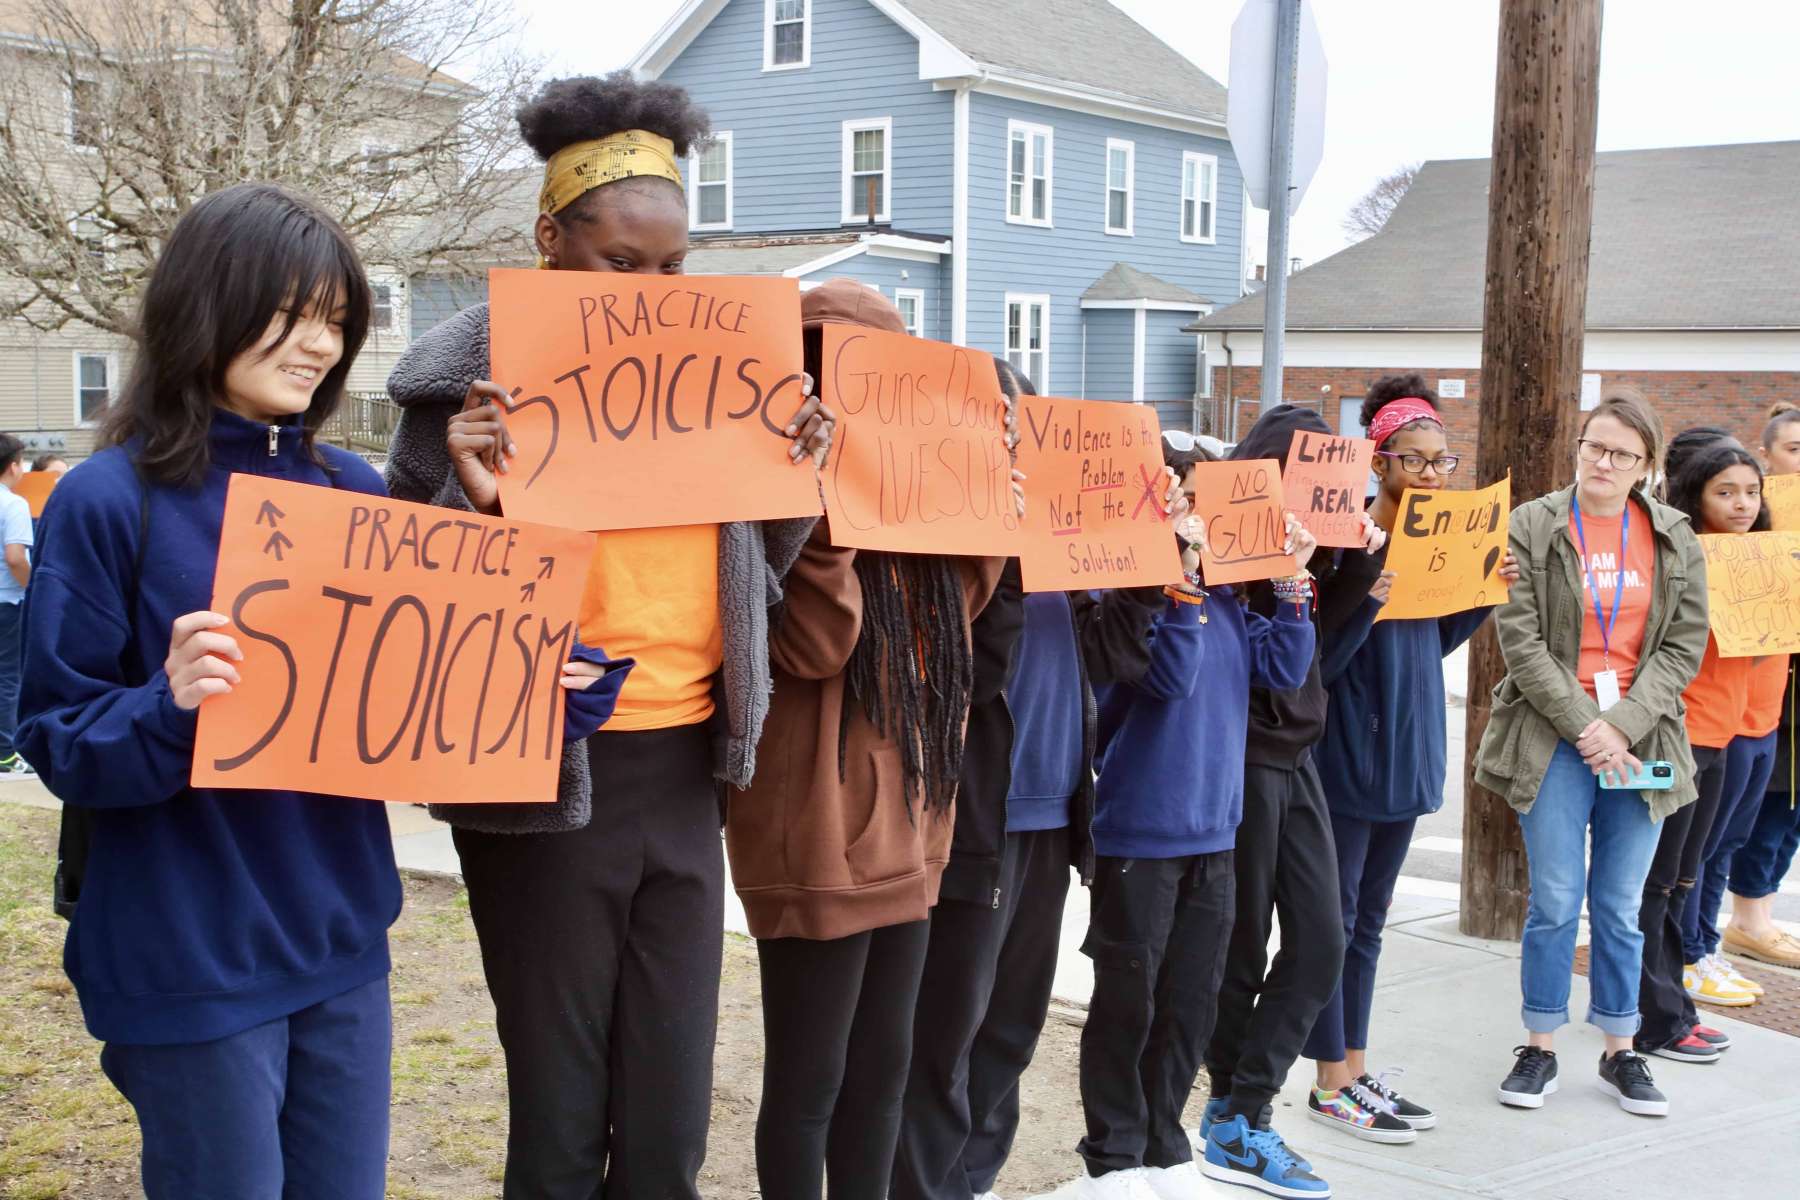 United in protest: Central Falls students join nationwide walkout for gun violence